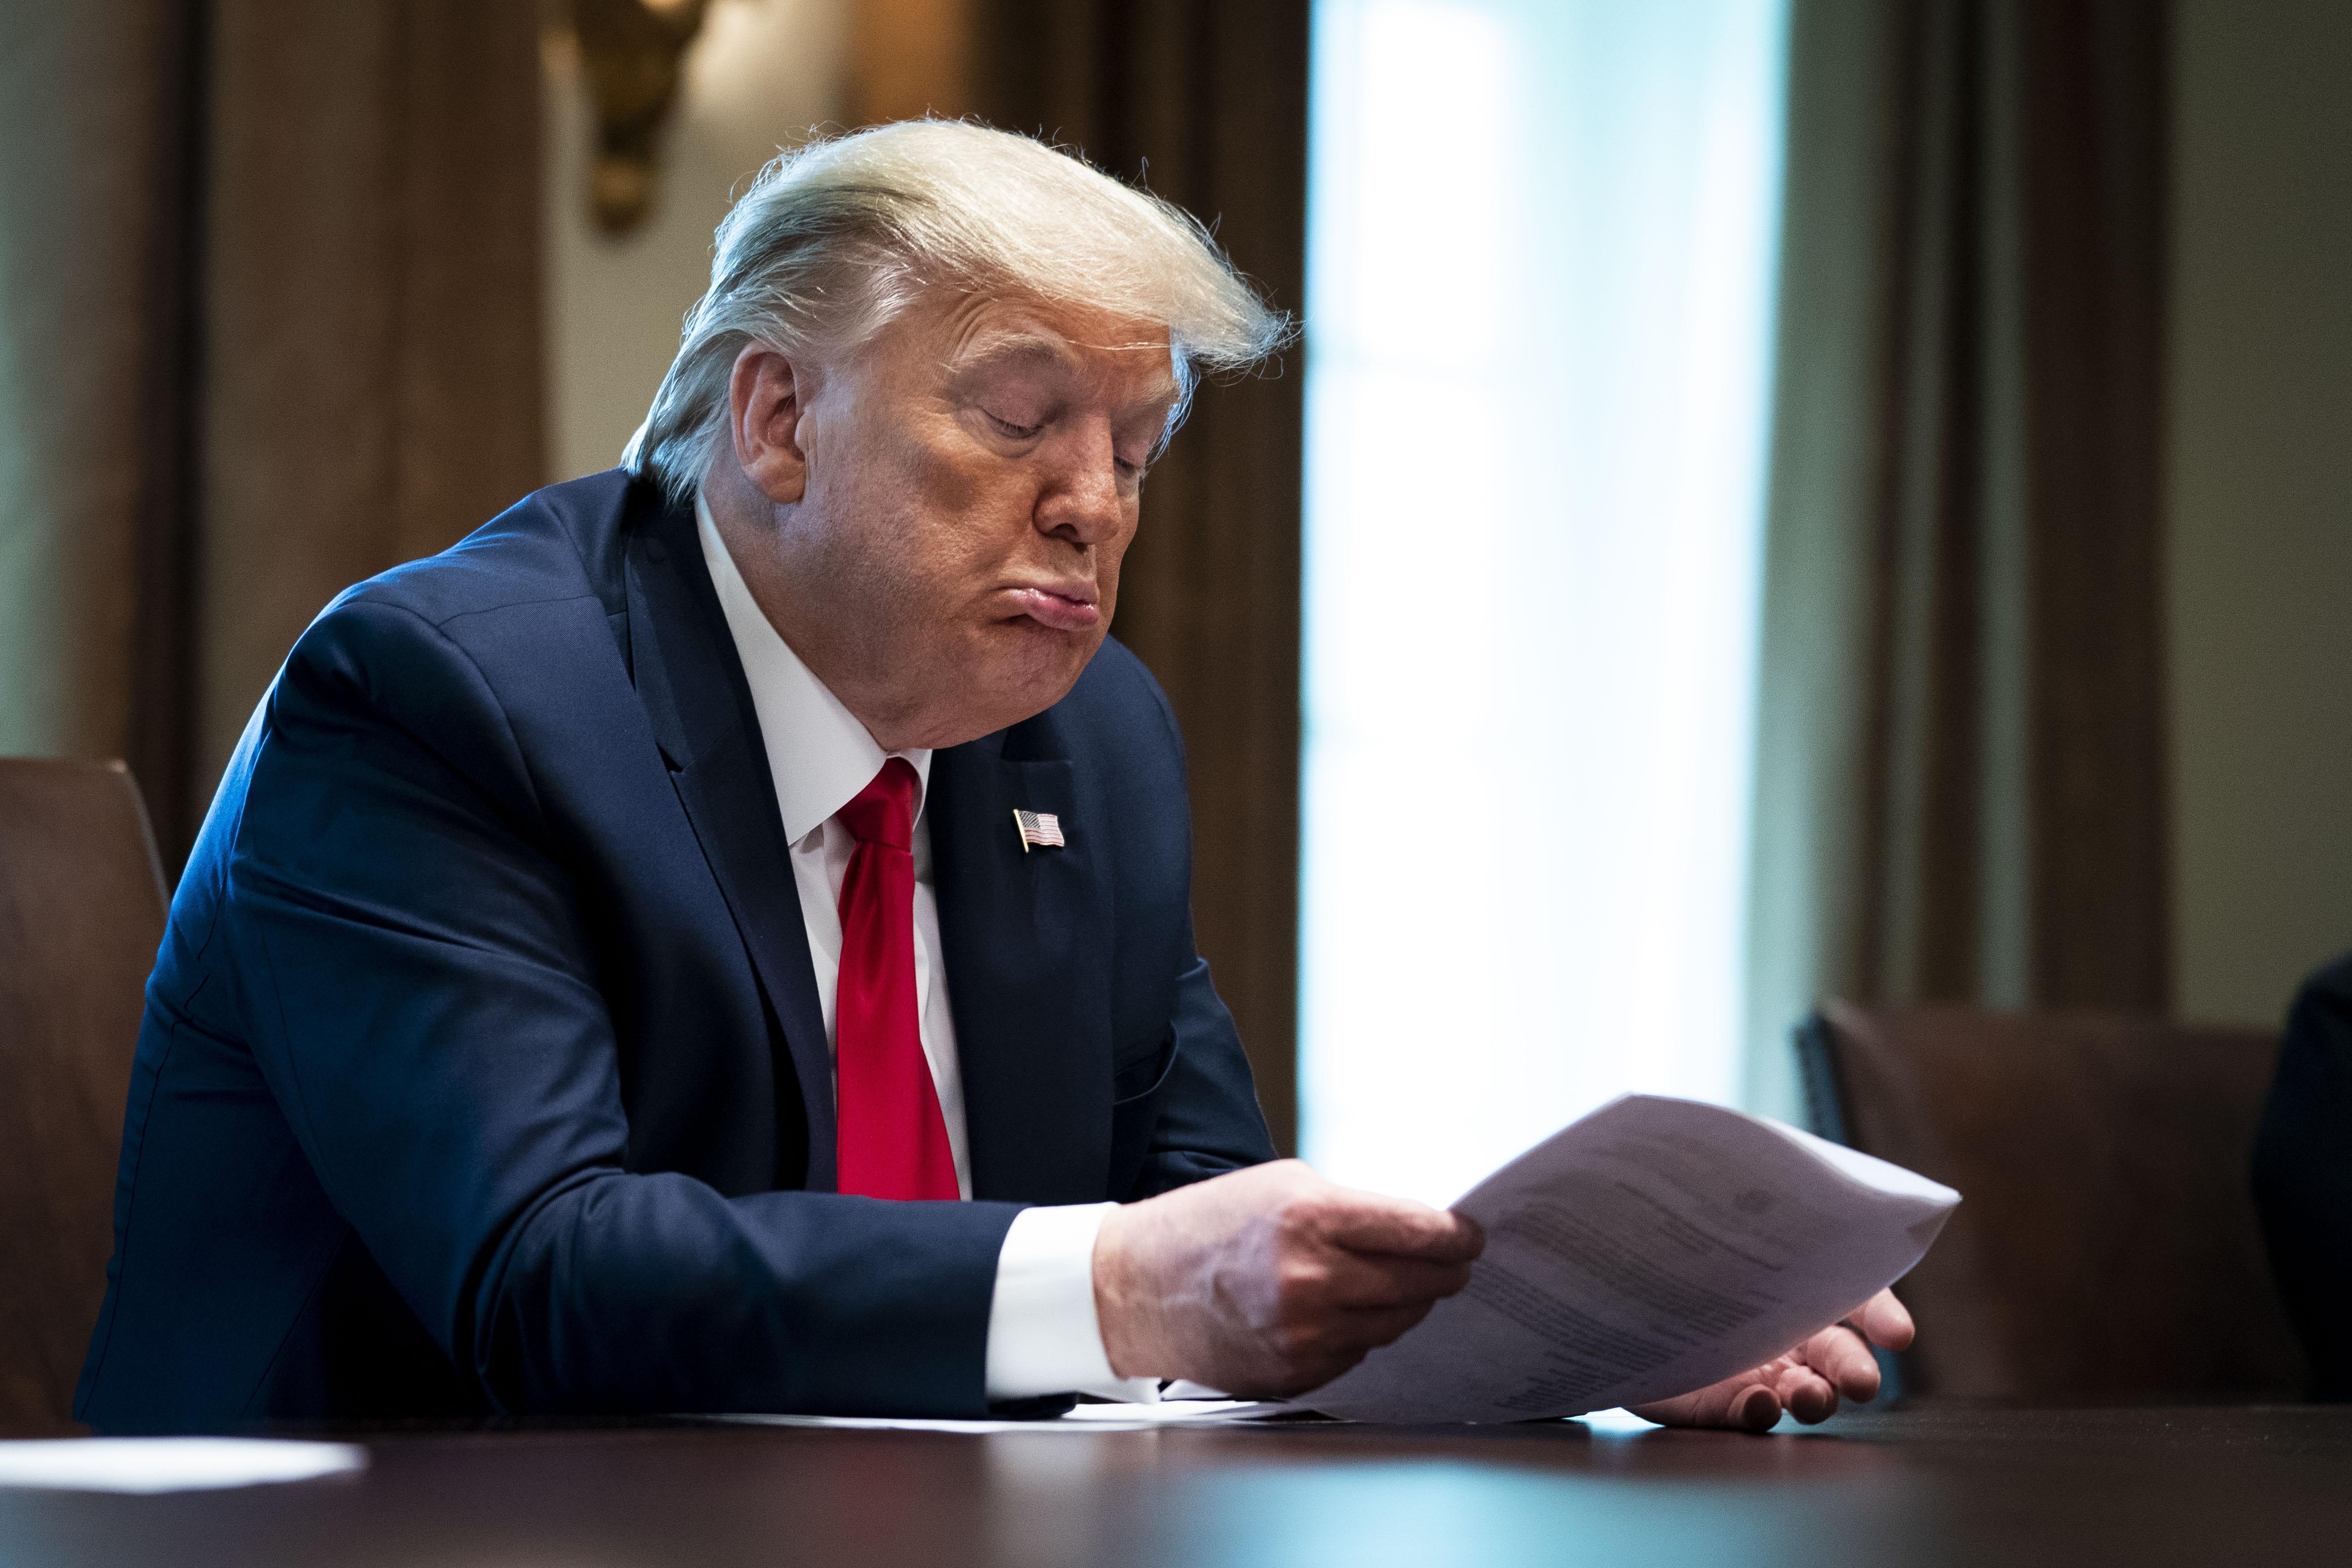 President Donald Trump makes that pursed lips face of his as he looks down at a piece of paper.